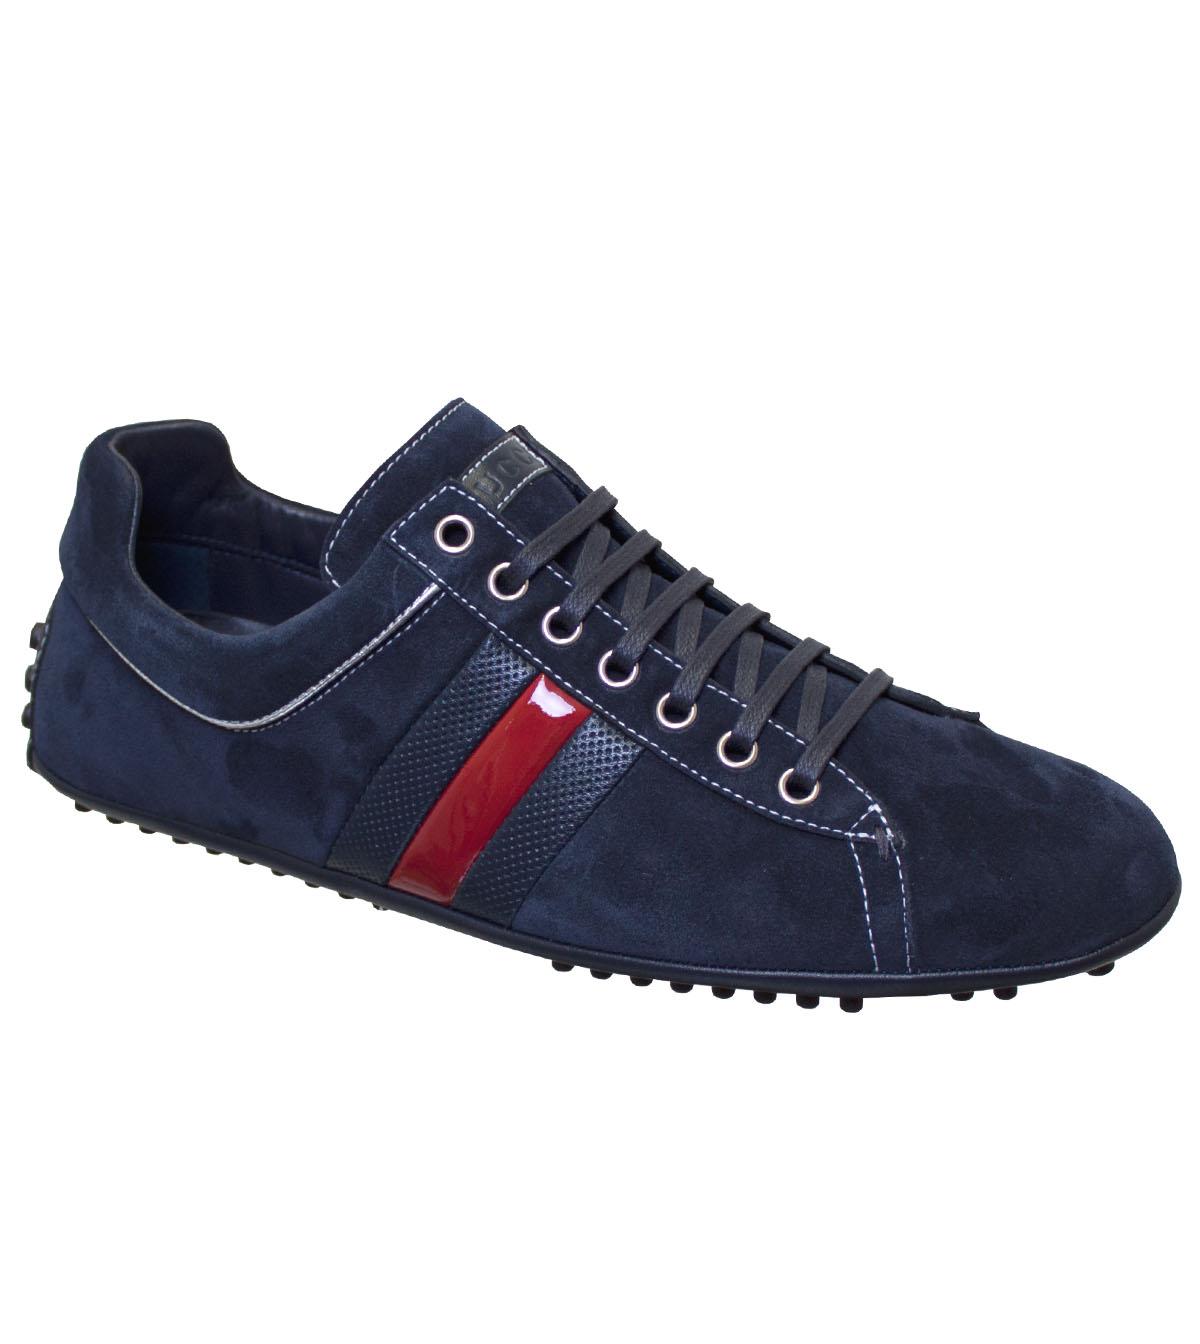 Foto Gucci Navy Suede Driving Style Trainer foto 49507